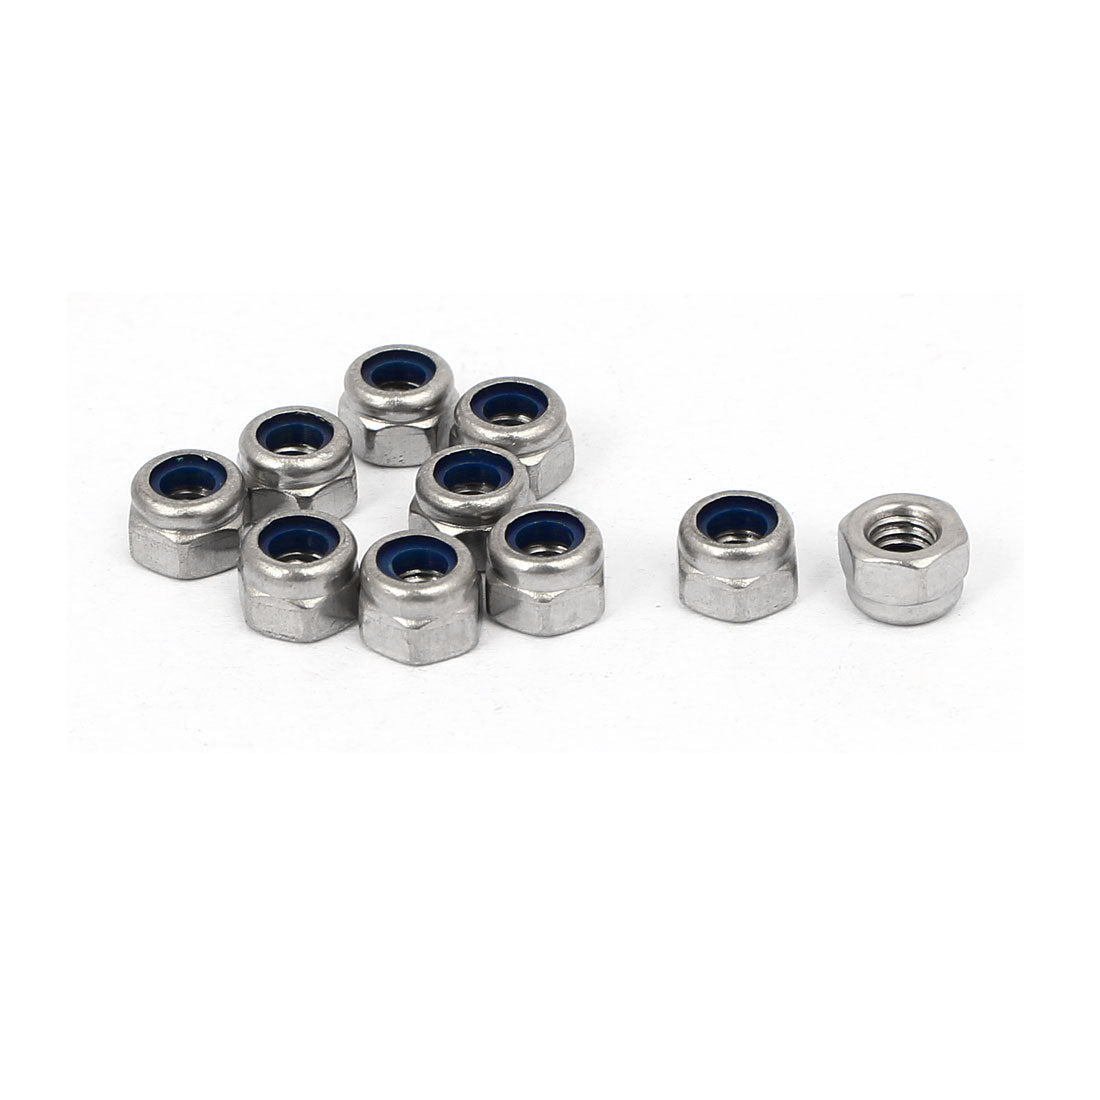 uxcell Uxcell M4 x 0.7mm 304 Stainless Steel Nylon Insert Hex Lock Locking Nut 10PCS